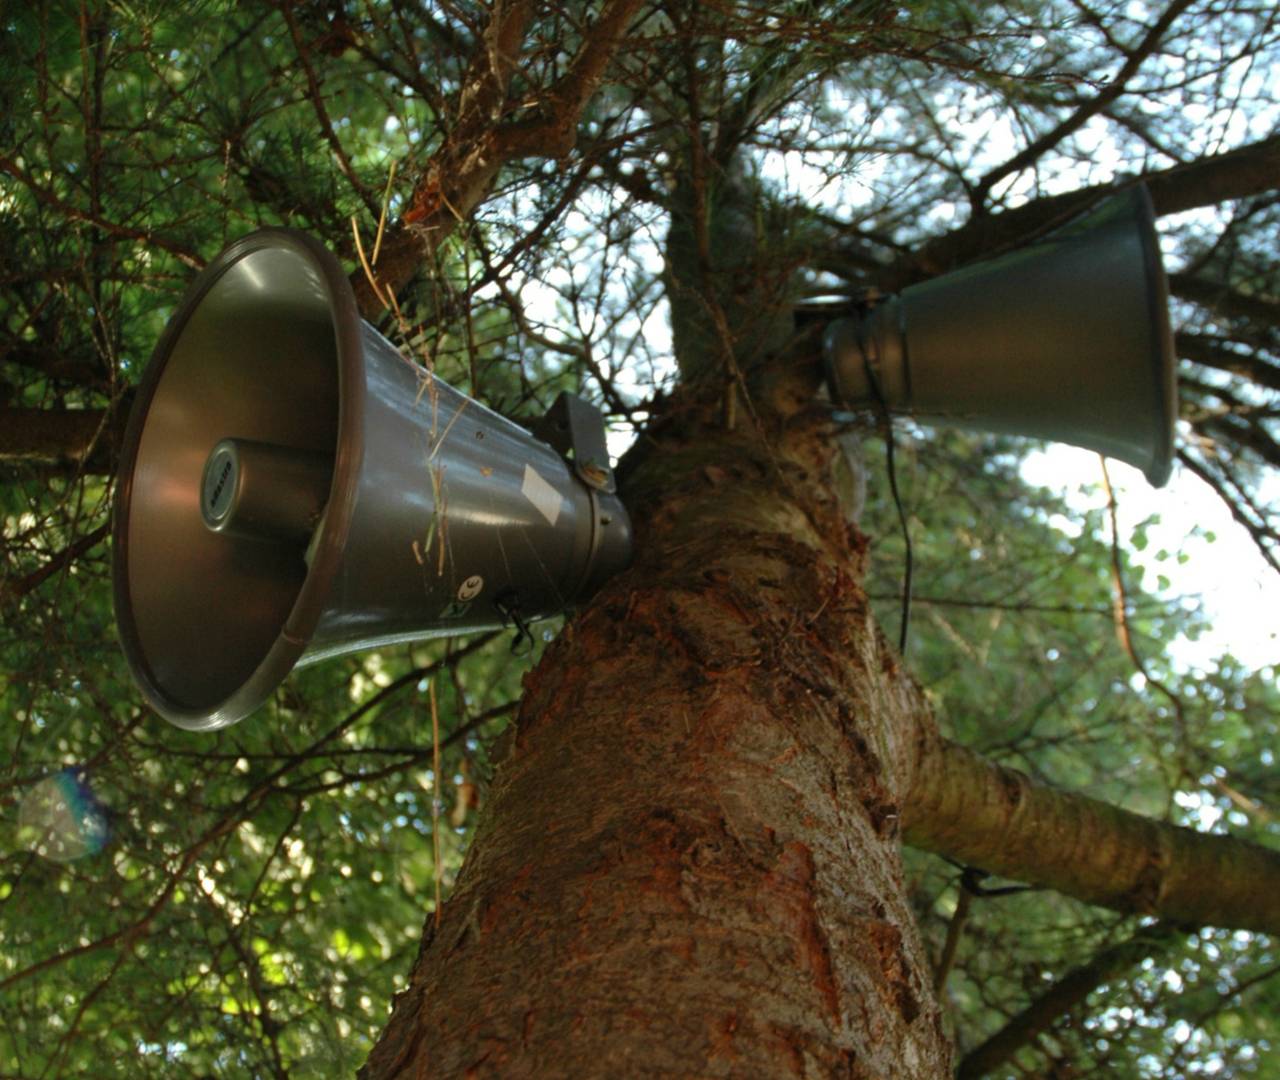 An installation image of speakers in a tree